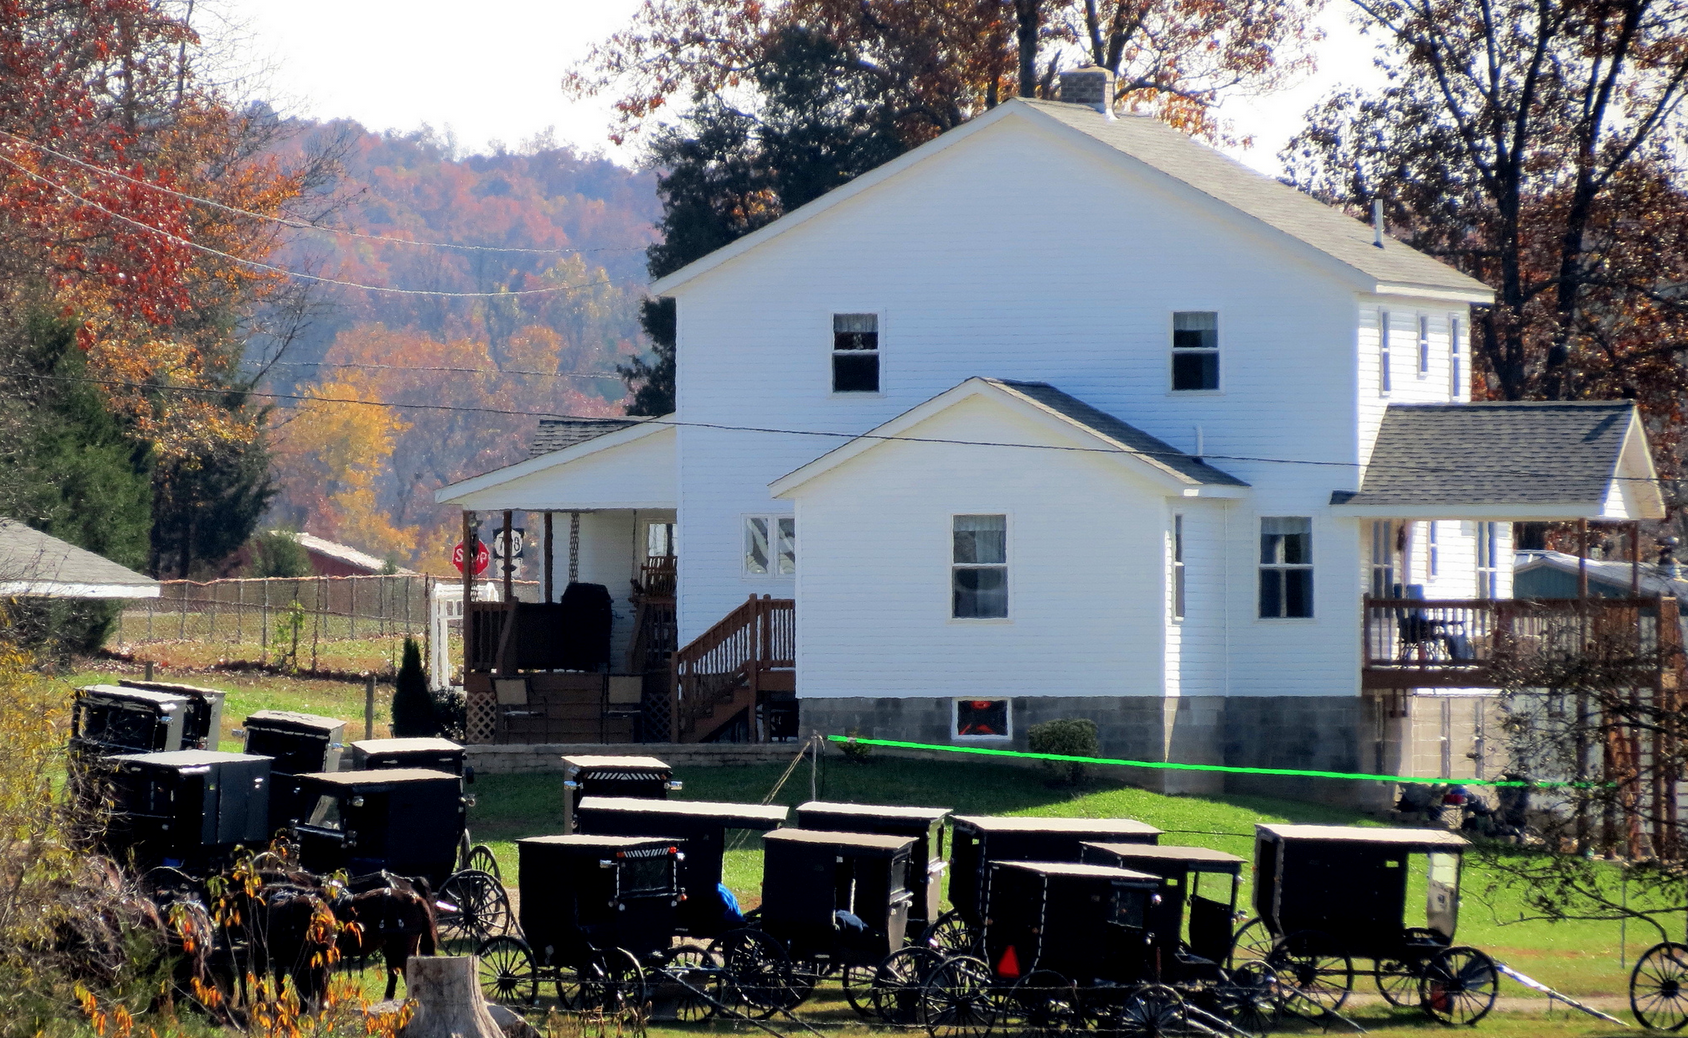 Everything You Want to Know About: Amish Church - No Church Buildings